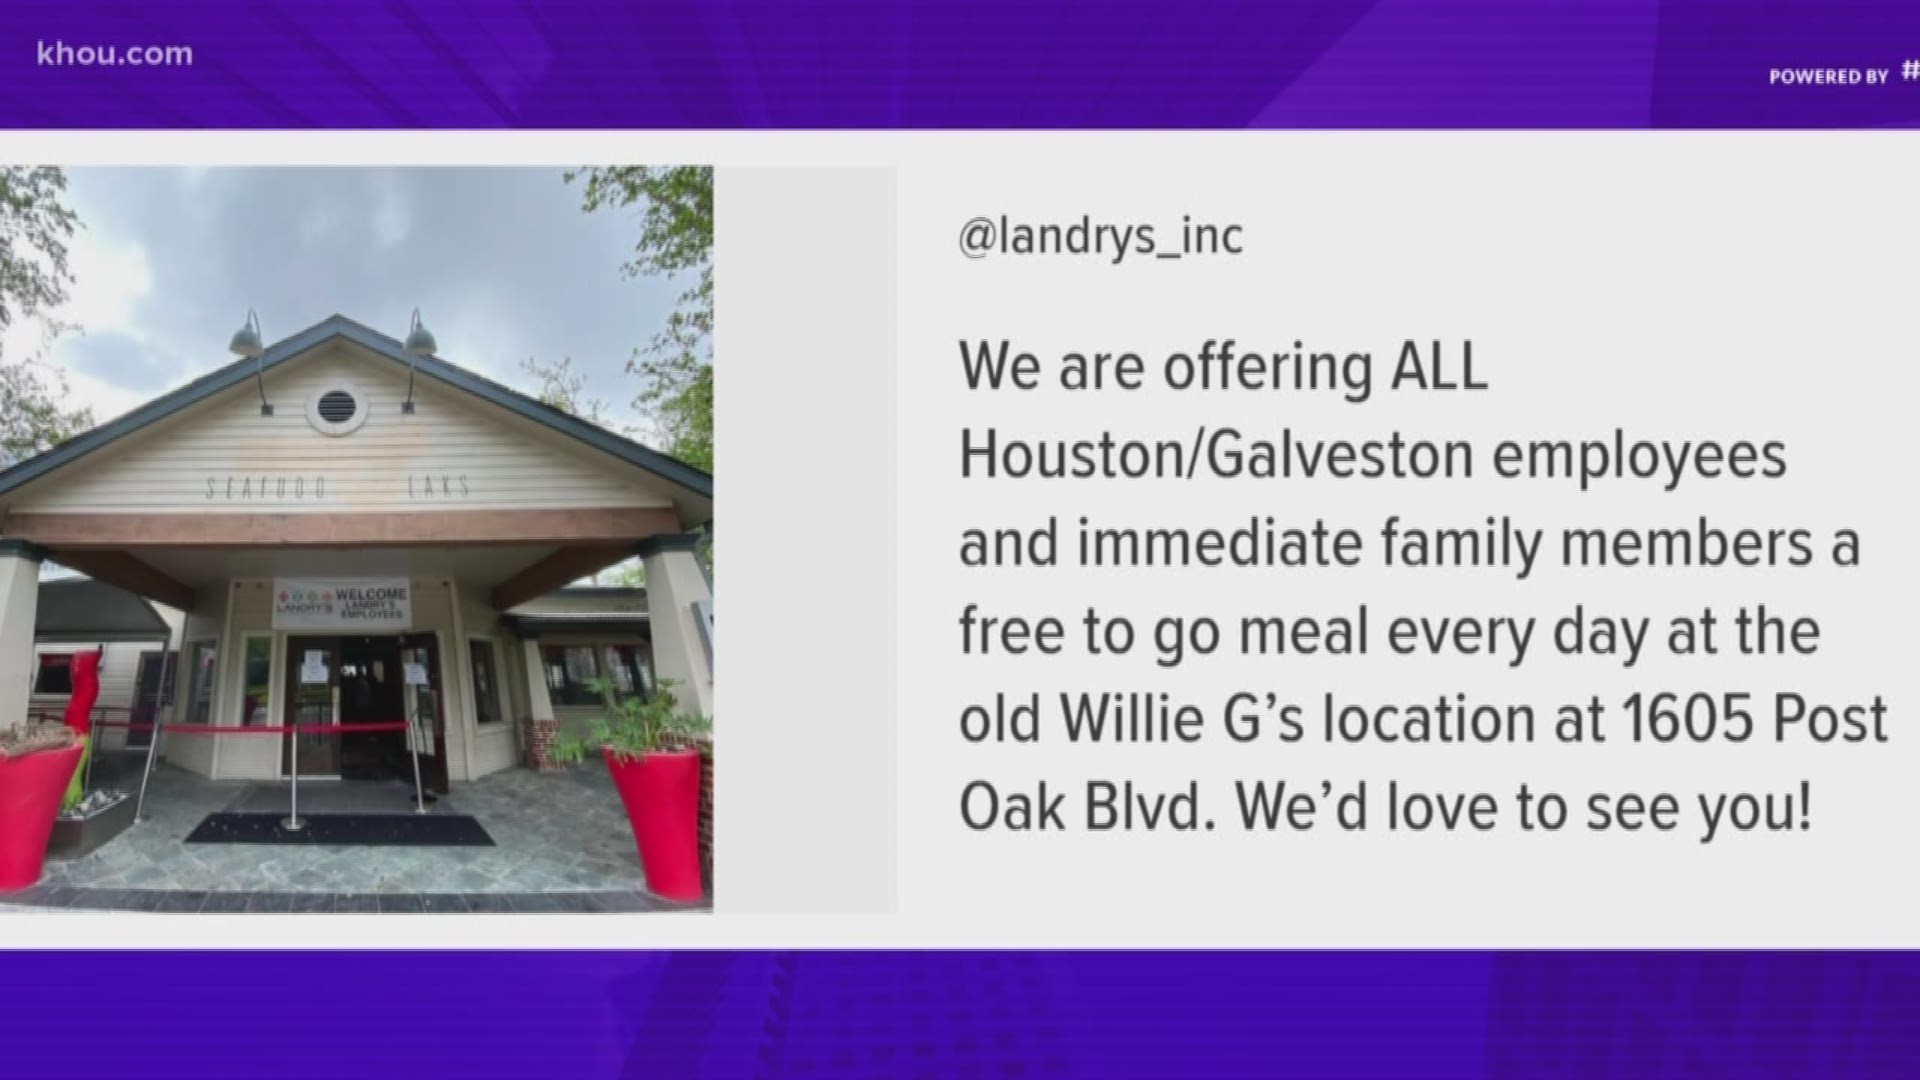 Landry's is offering free to-go meals every day to firefighters, paramedics, EMTs and police officers through the coronavirus pandemic.